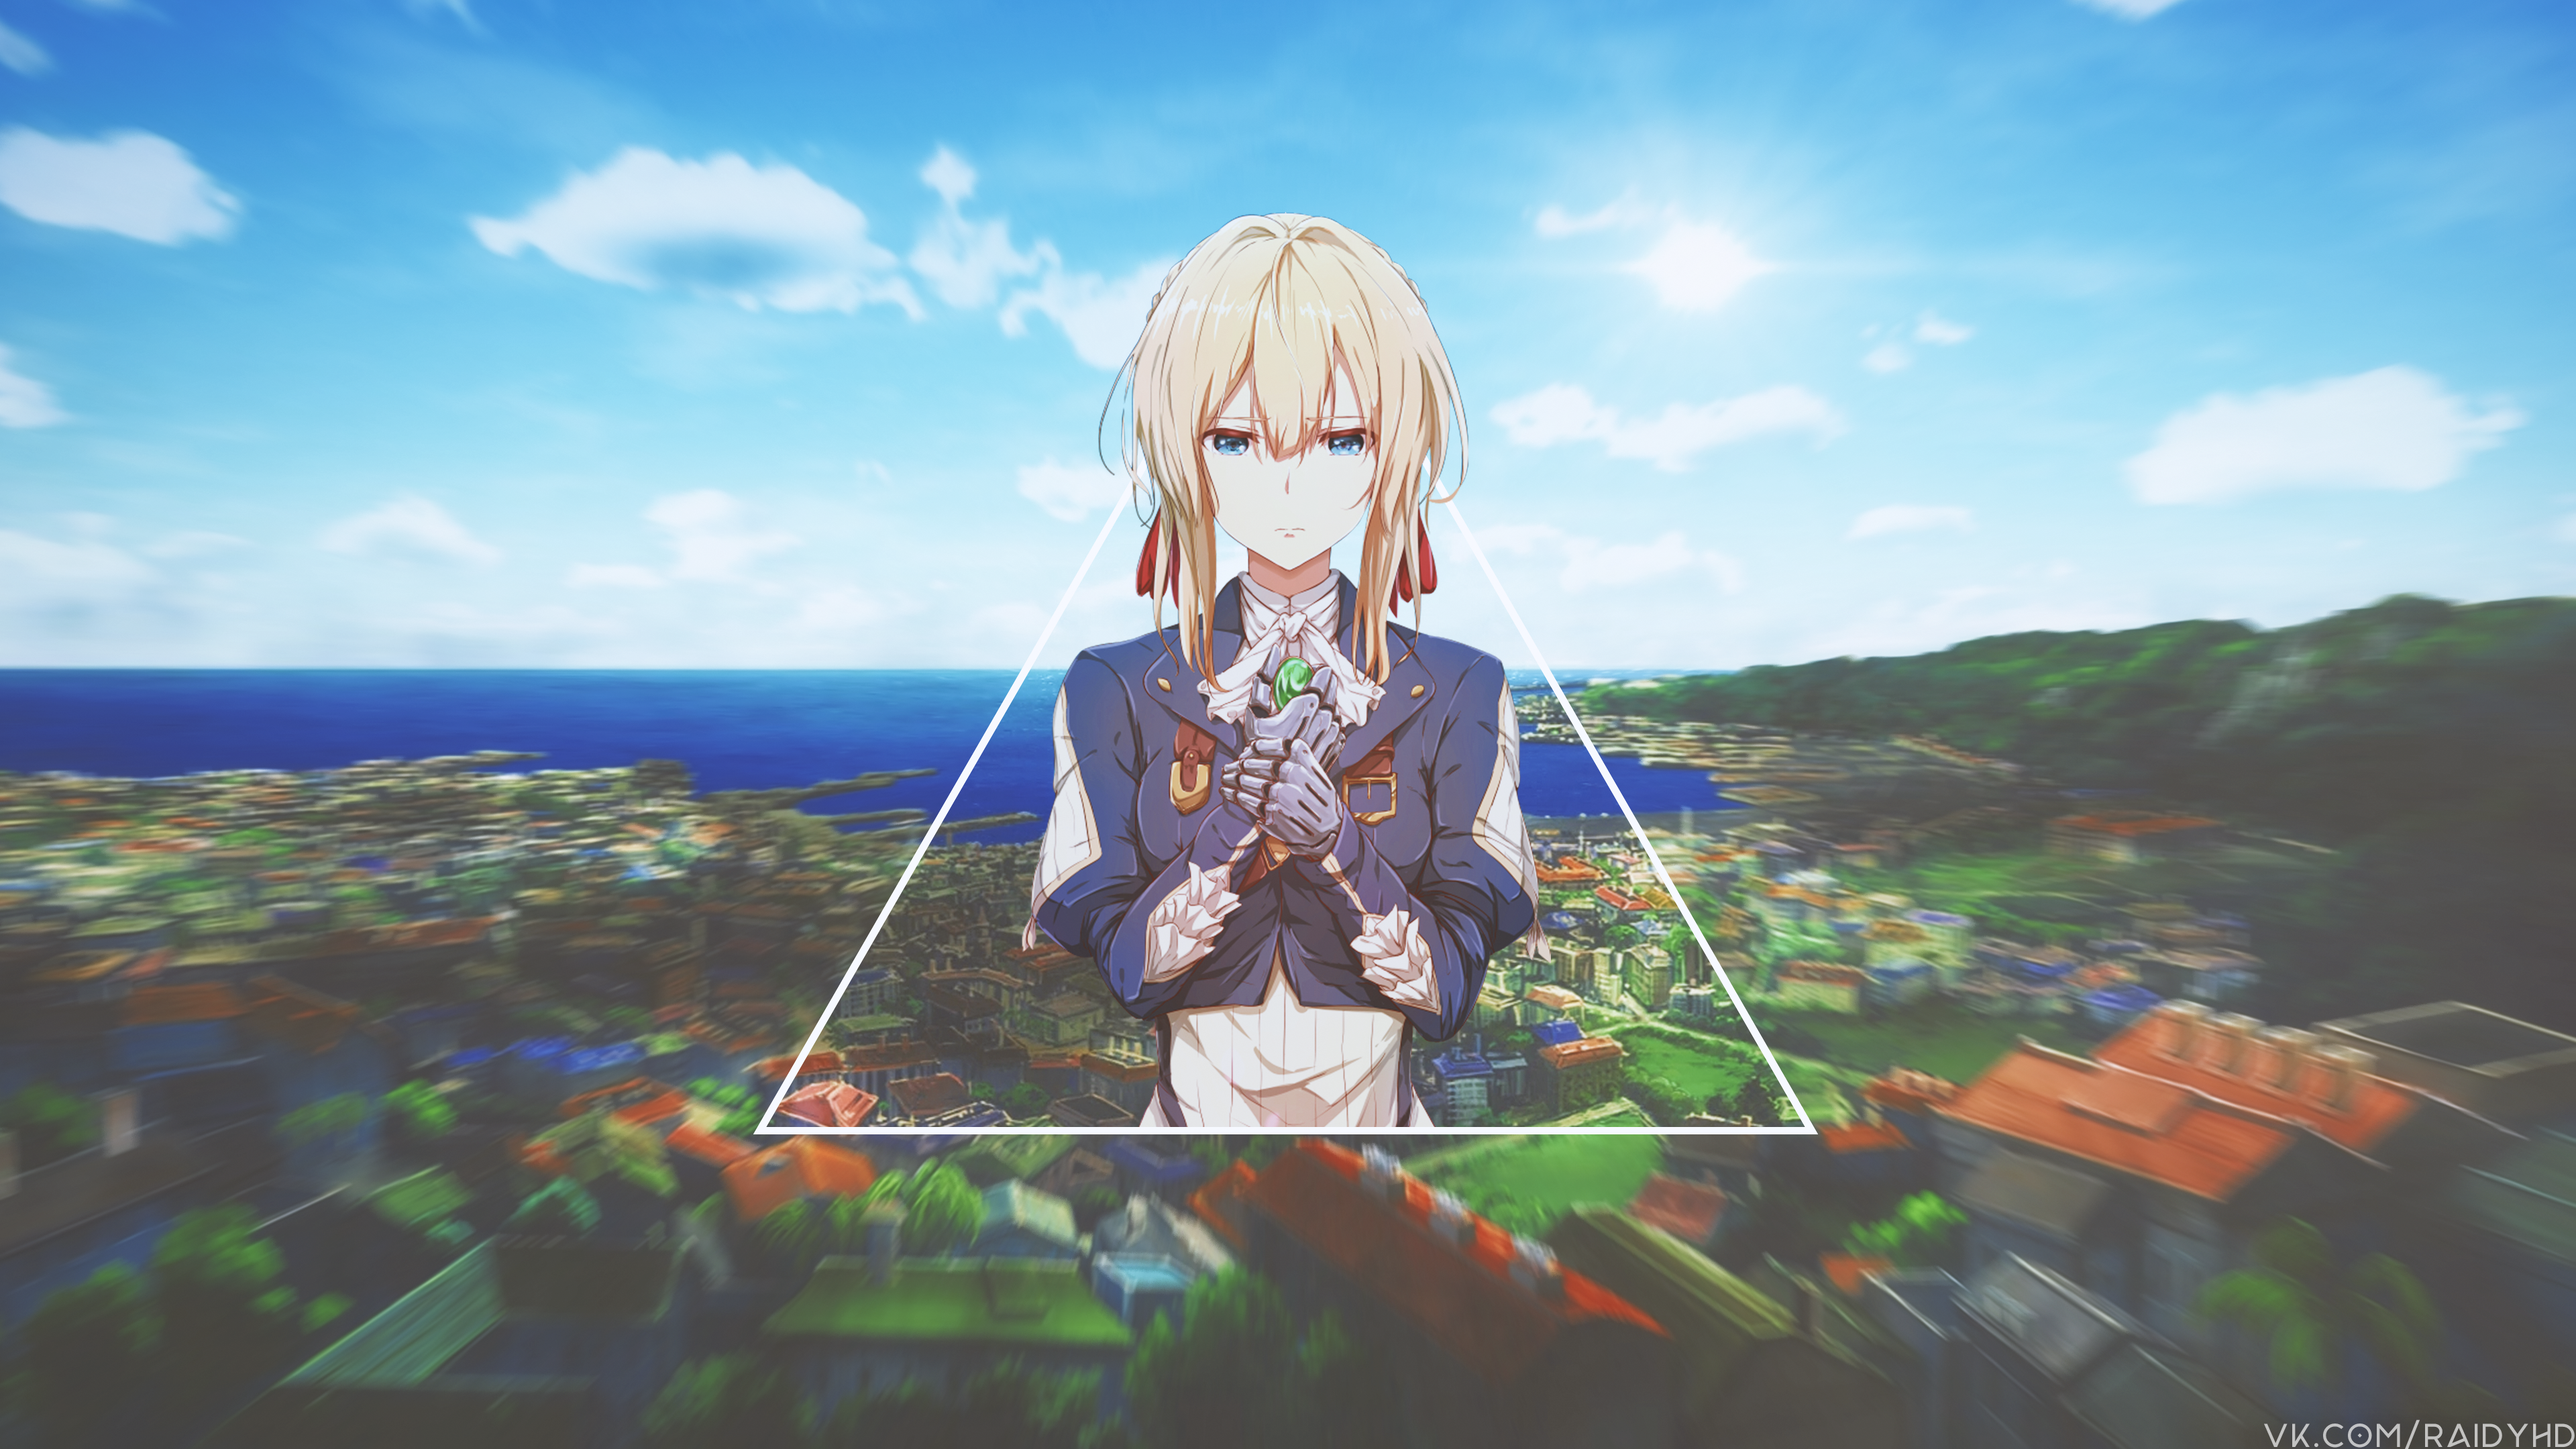 Anime 3840x2160 anime anime girls picture-in-picture Violet Evergarden Gilbert Bougainvillea